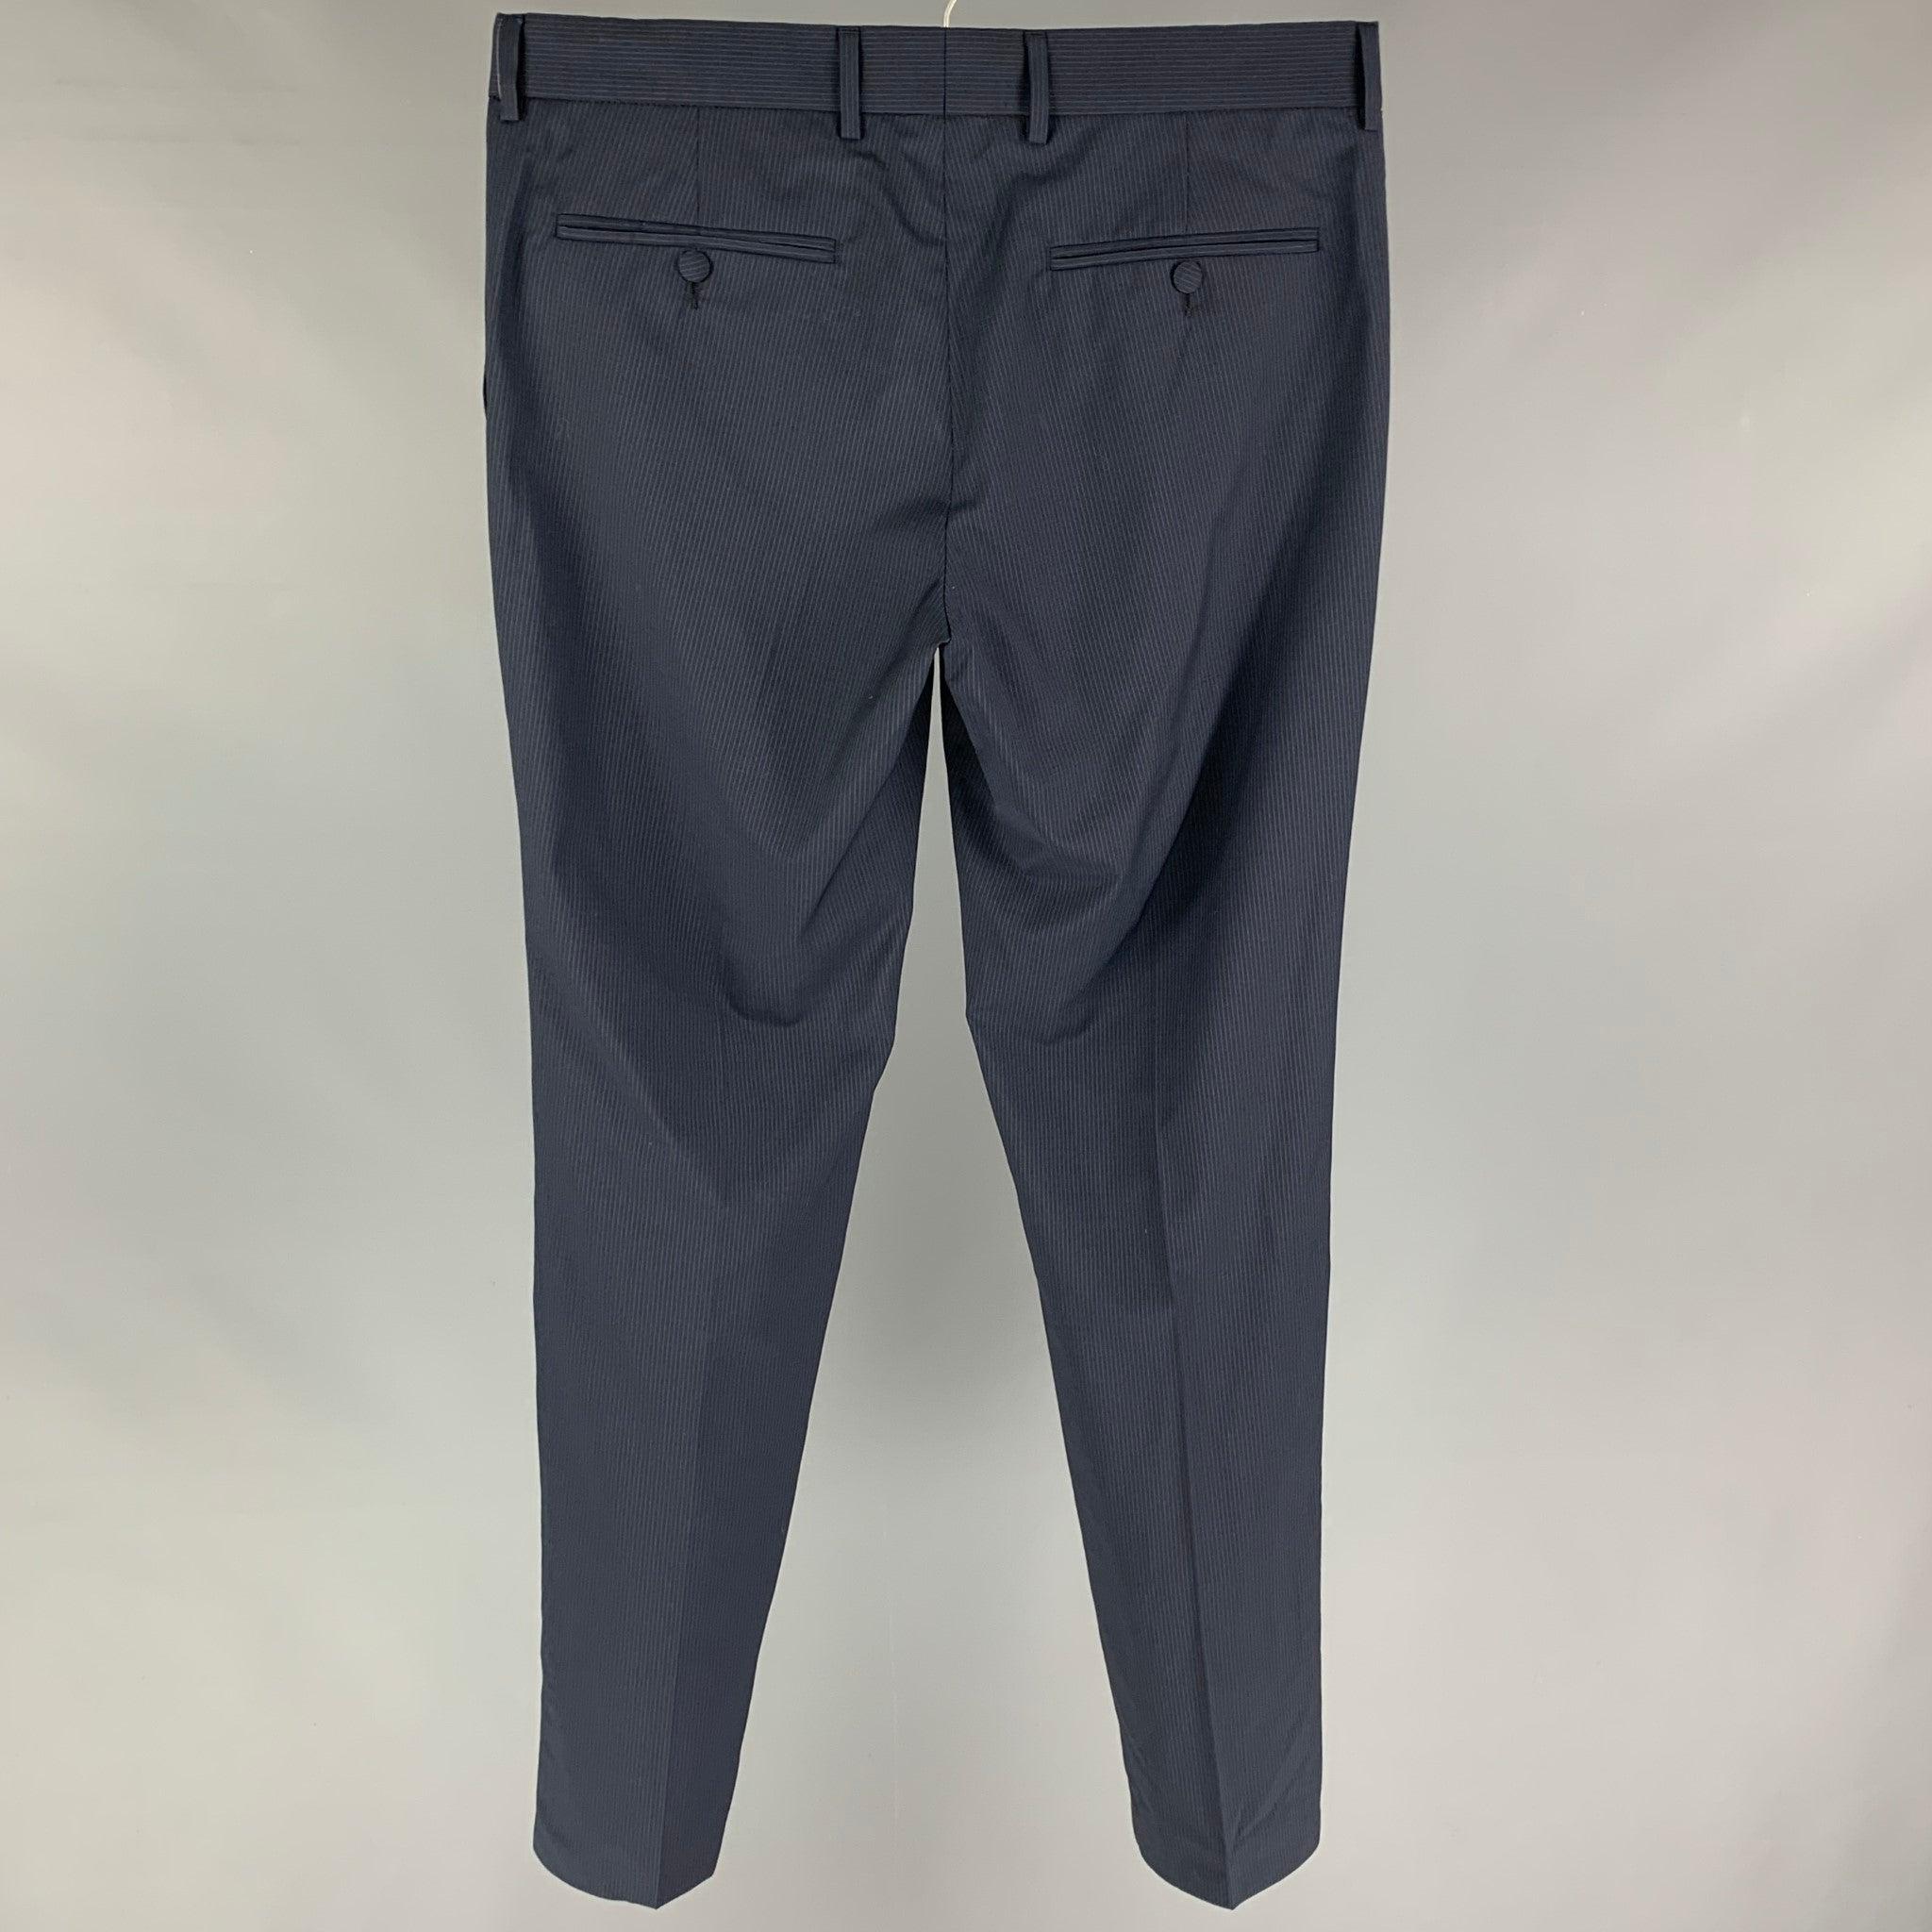 THE KOOPLES dress pants comes in a navy stripe wool featuring a slim fit, front tab, and a zip fly closure.
New with tags.  

Marked:   48 

Measurements: 
  Waist: 34 inches Rise: 9 inches Inseam: 32 inches Leg Opening: 14 inches 

  
  
